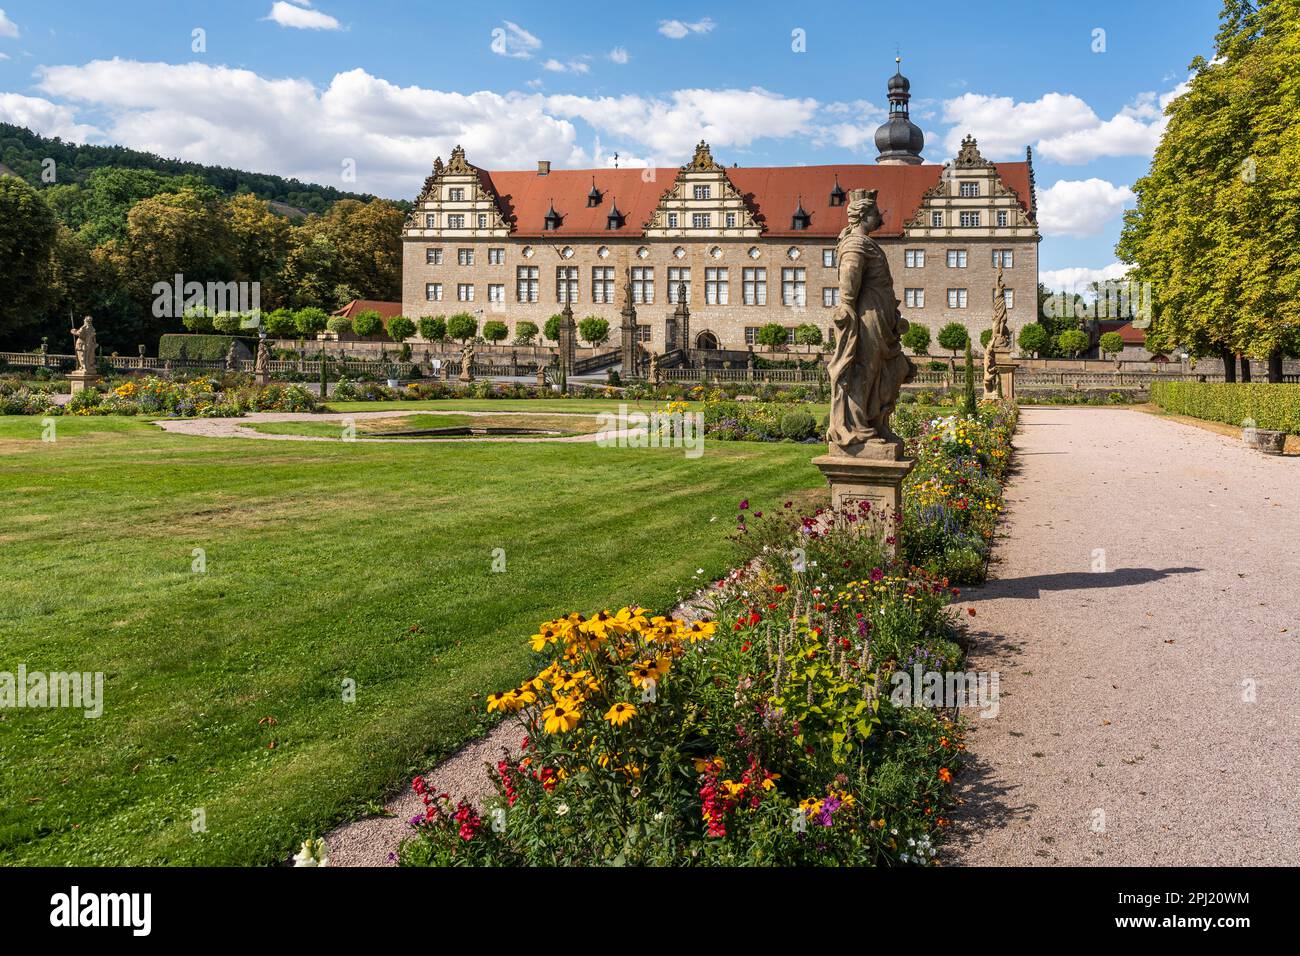 View of Weikersheim Palace (Schloss Weikersheim), surrounded by a beautiful park and located on the famous Romantic Road, Germany Stock Photo